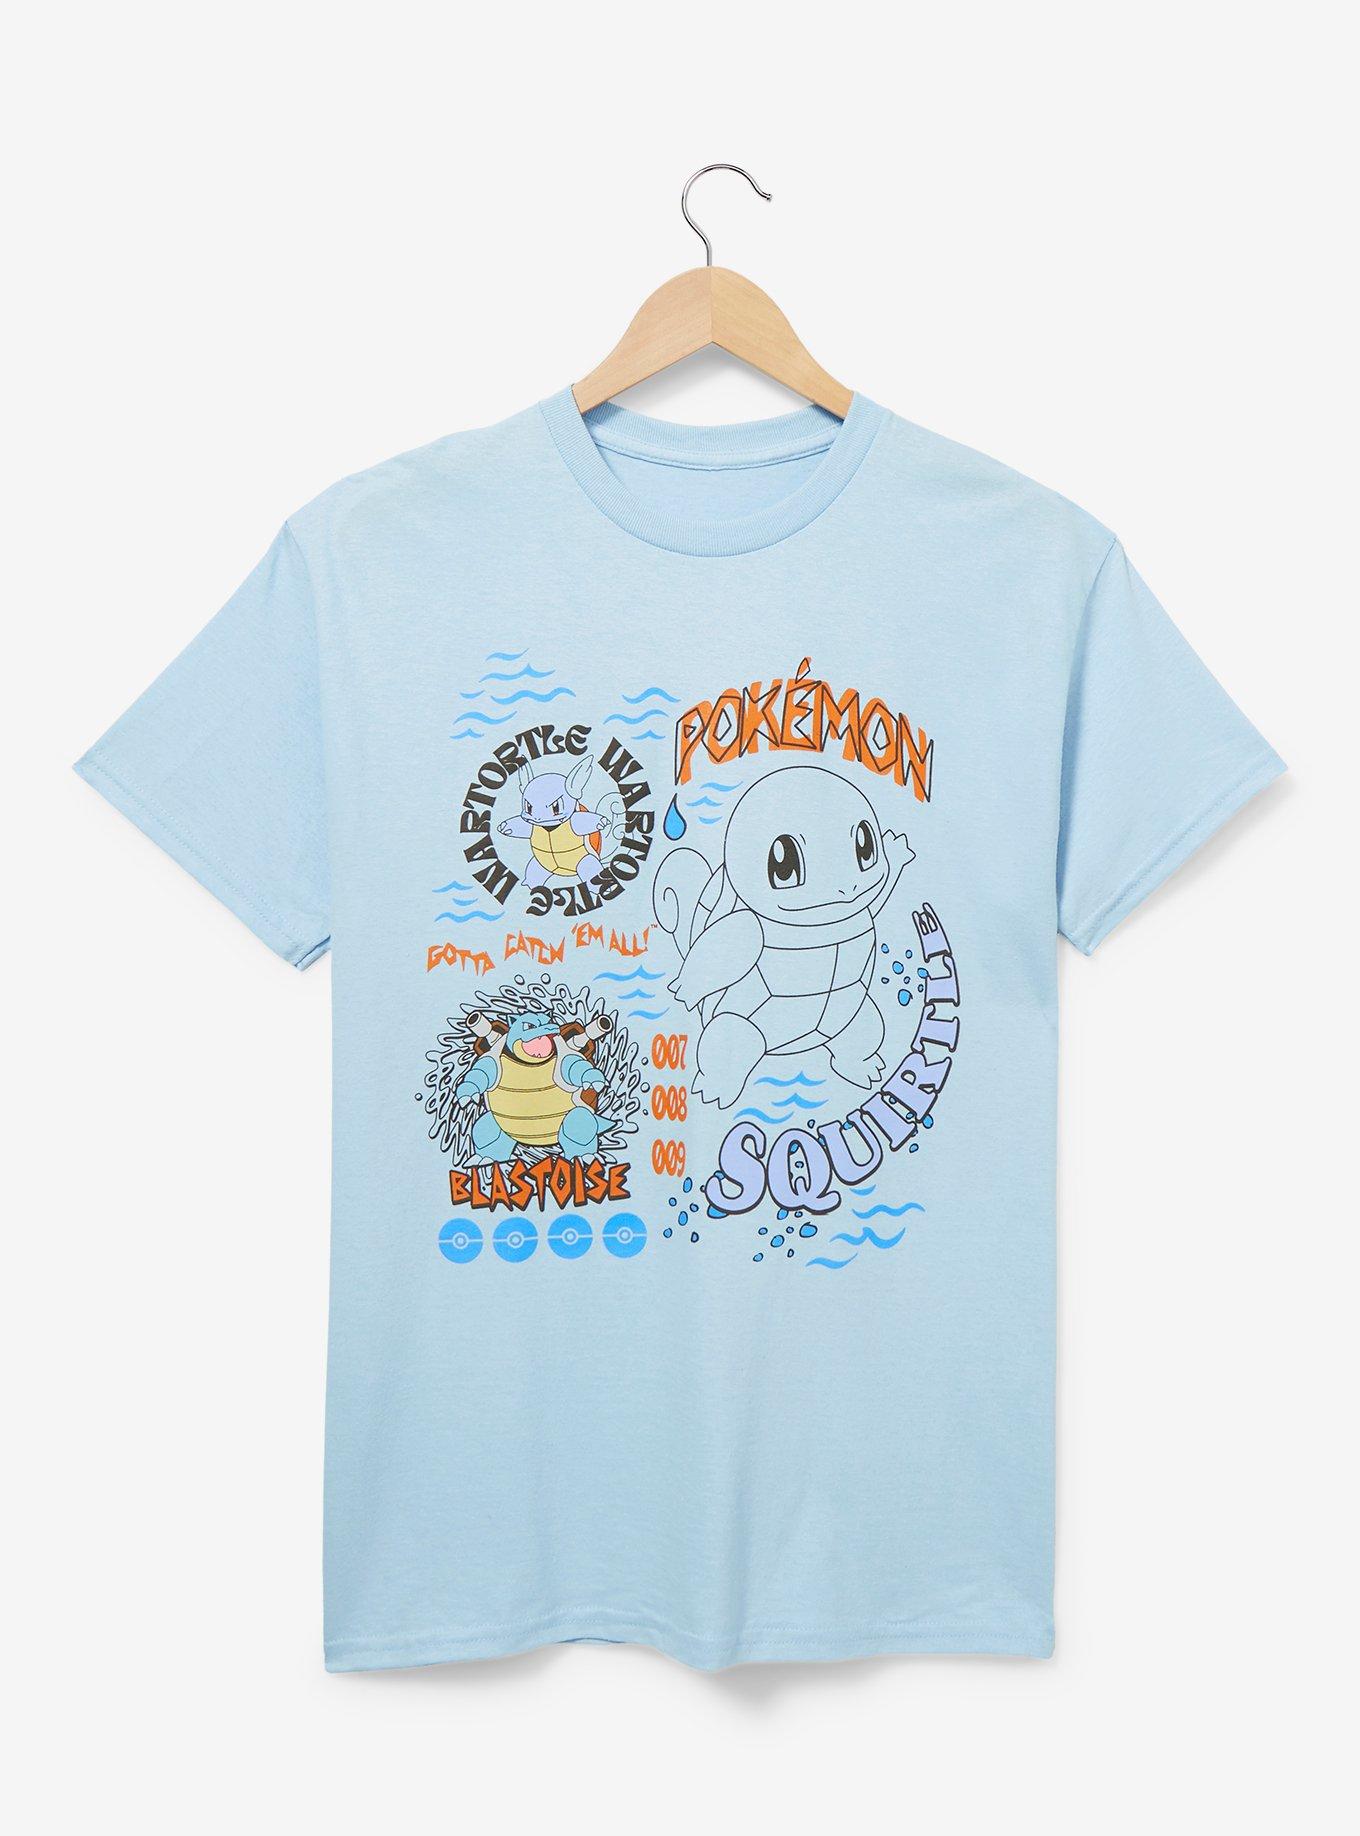 Pokémon Squirtle Evolutions Women’s T-Shirt - BoxLunch Exclusive | BoxLunch